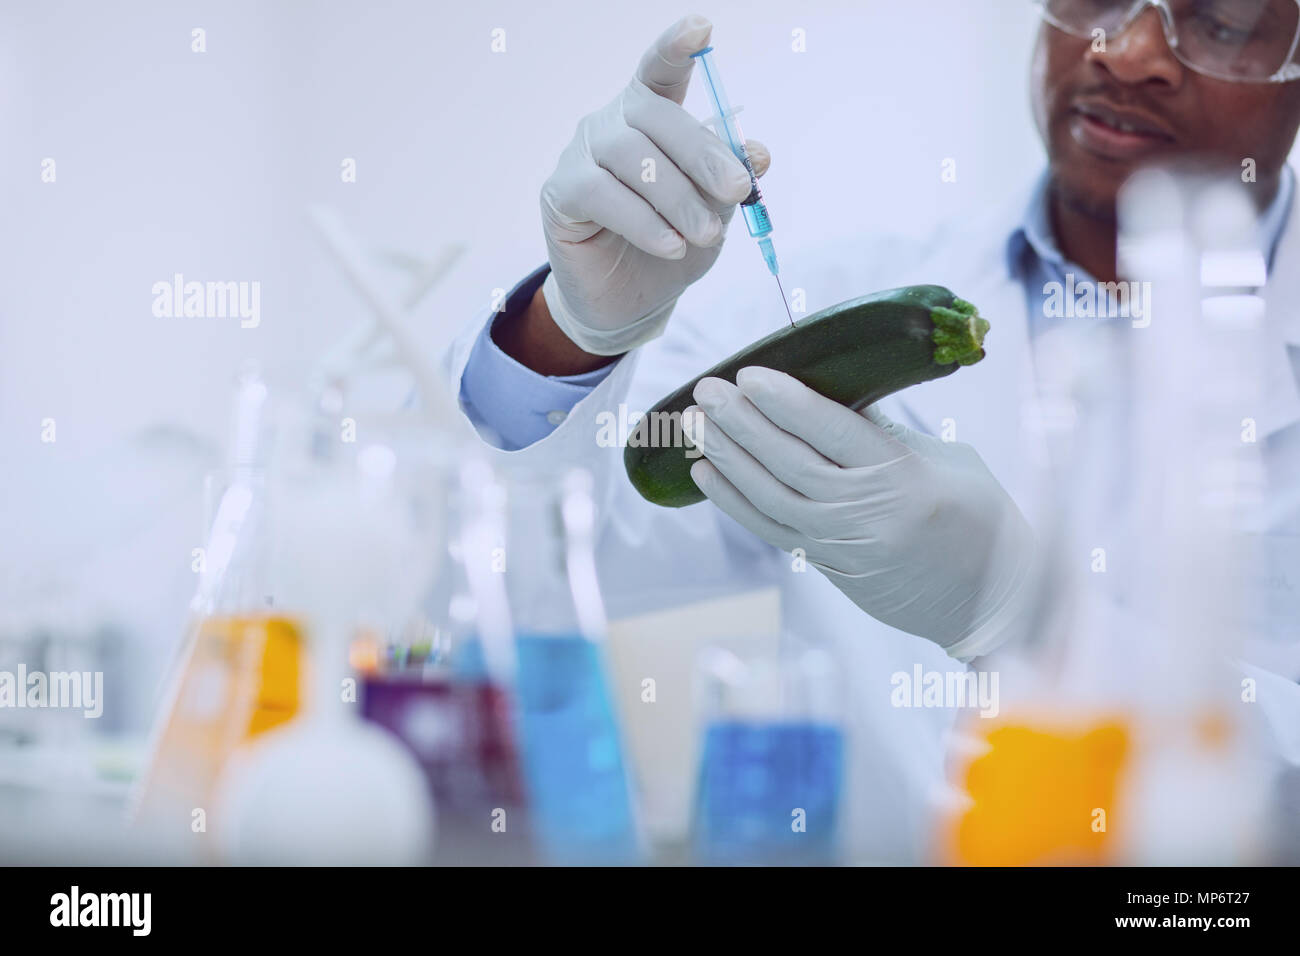 Concentrated afro-american researcher testing a marrow squash Stock Photo